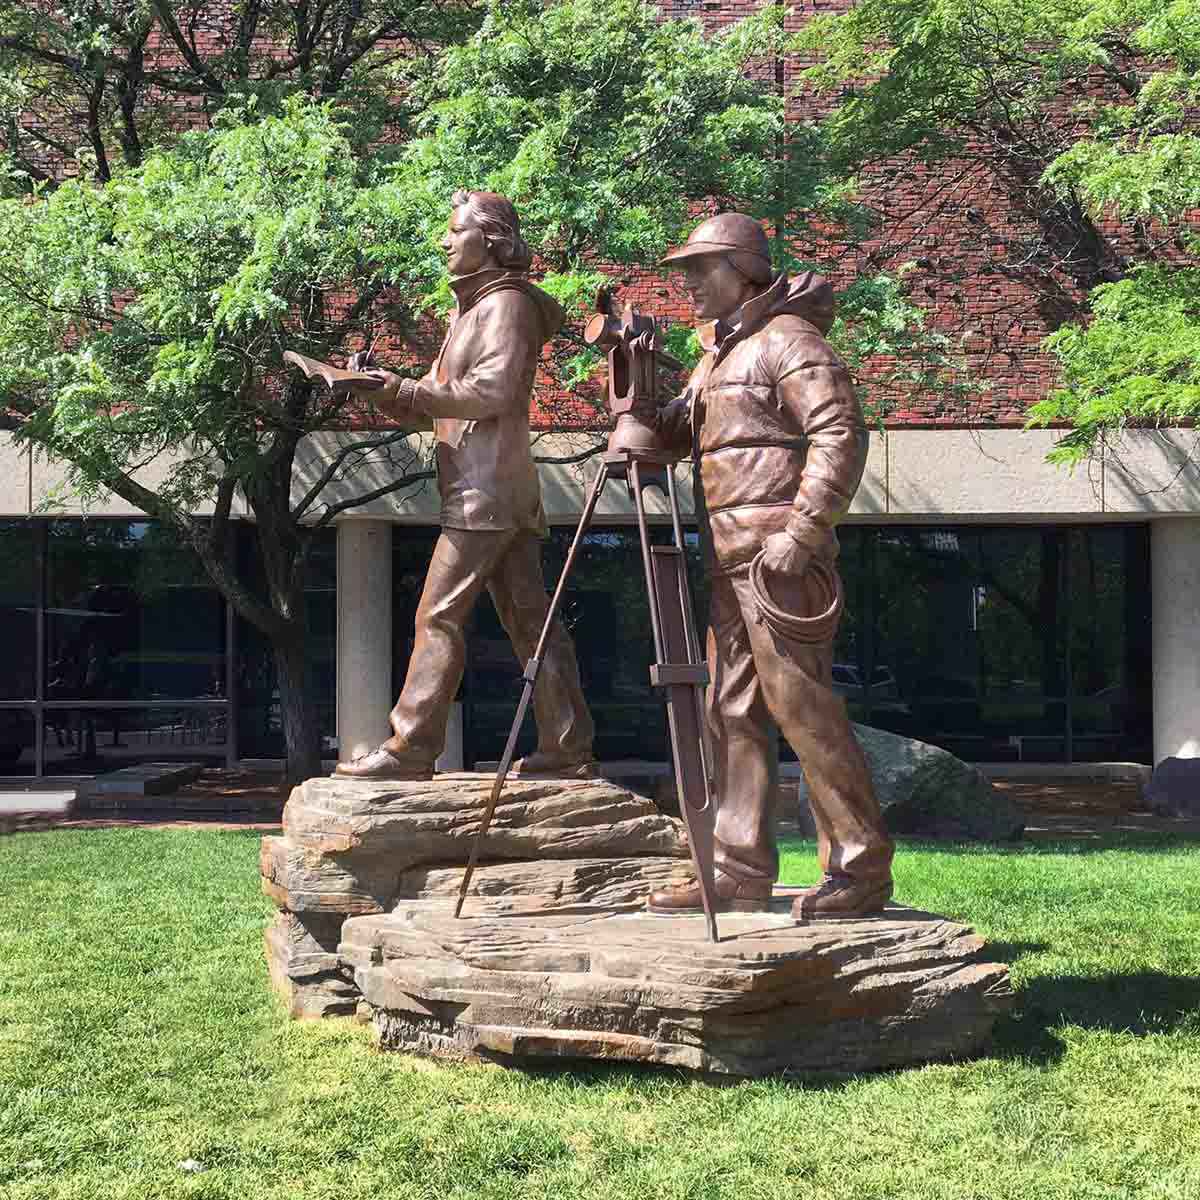 photo of bronze sculpture of man and woman in winter gear with theodolite on tripod and woman taking notes, standing on rock surface in front of a building on a green lawn